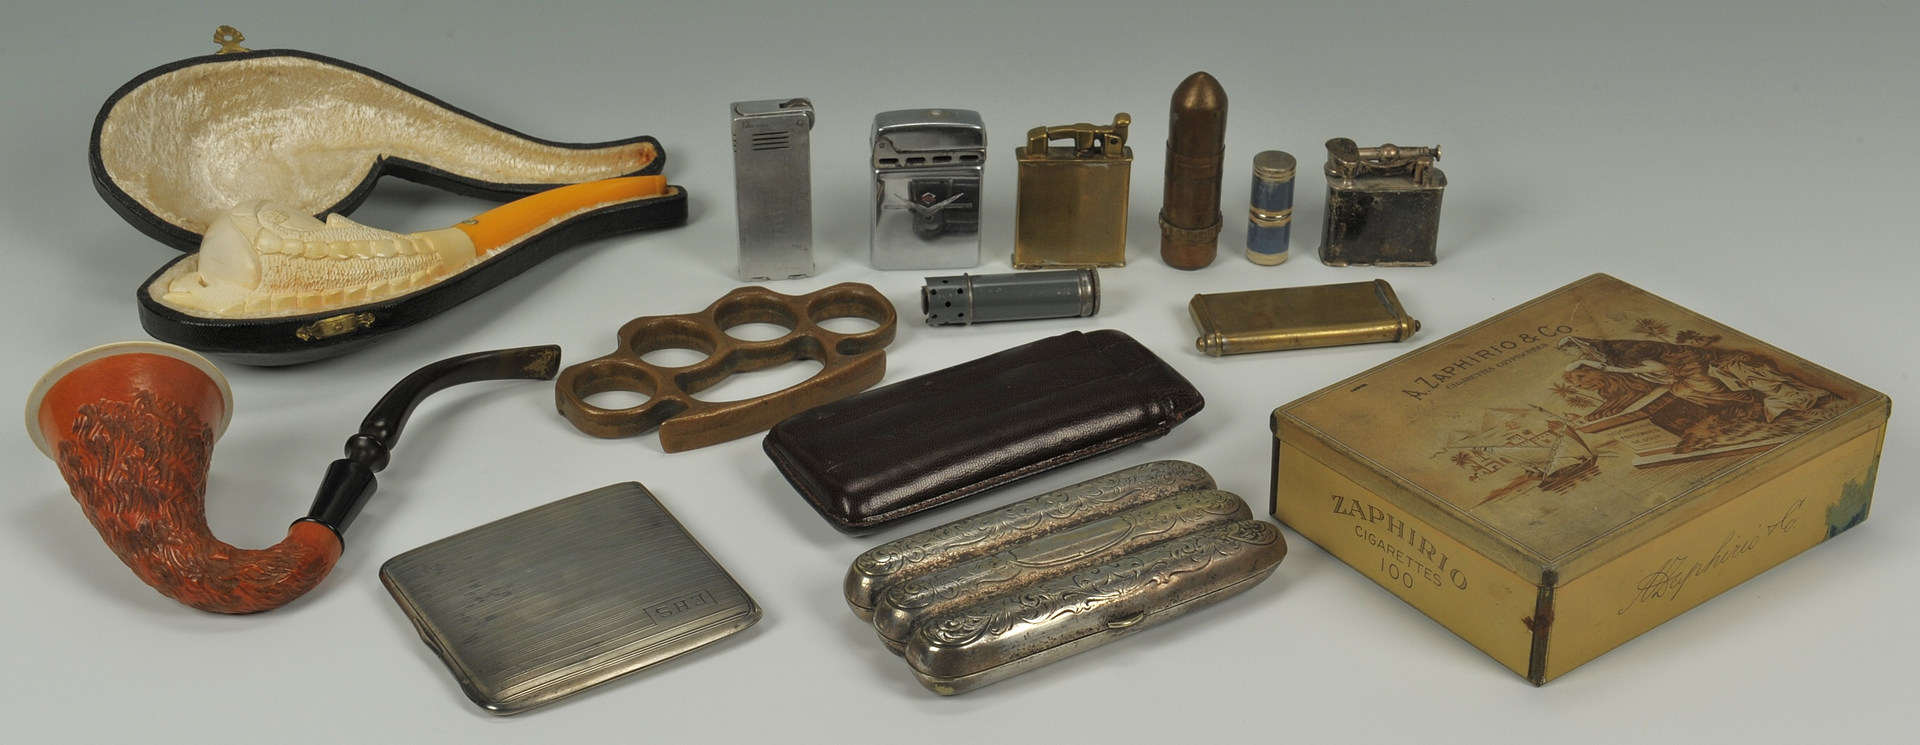 Lot 374: Lot of smoking related items and pr brass knuckles